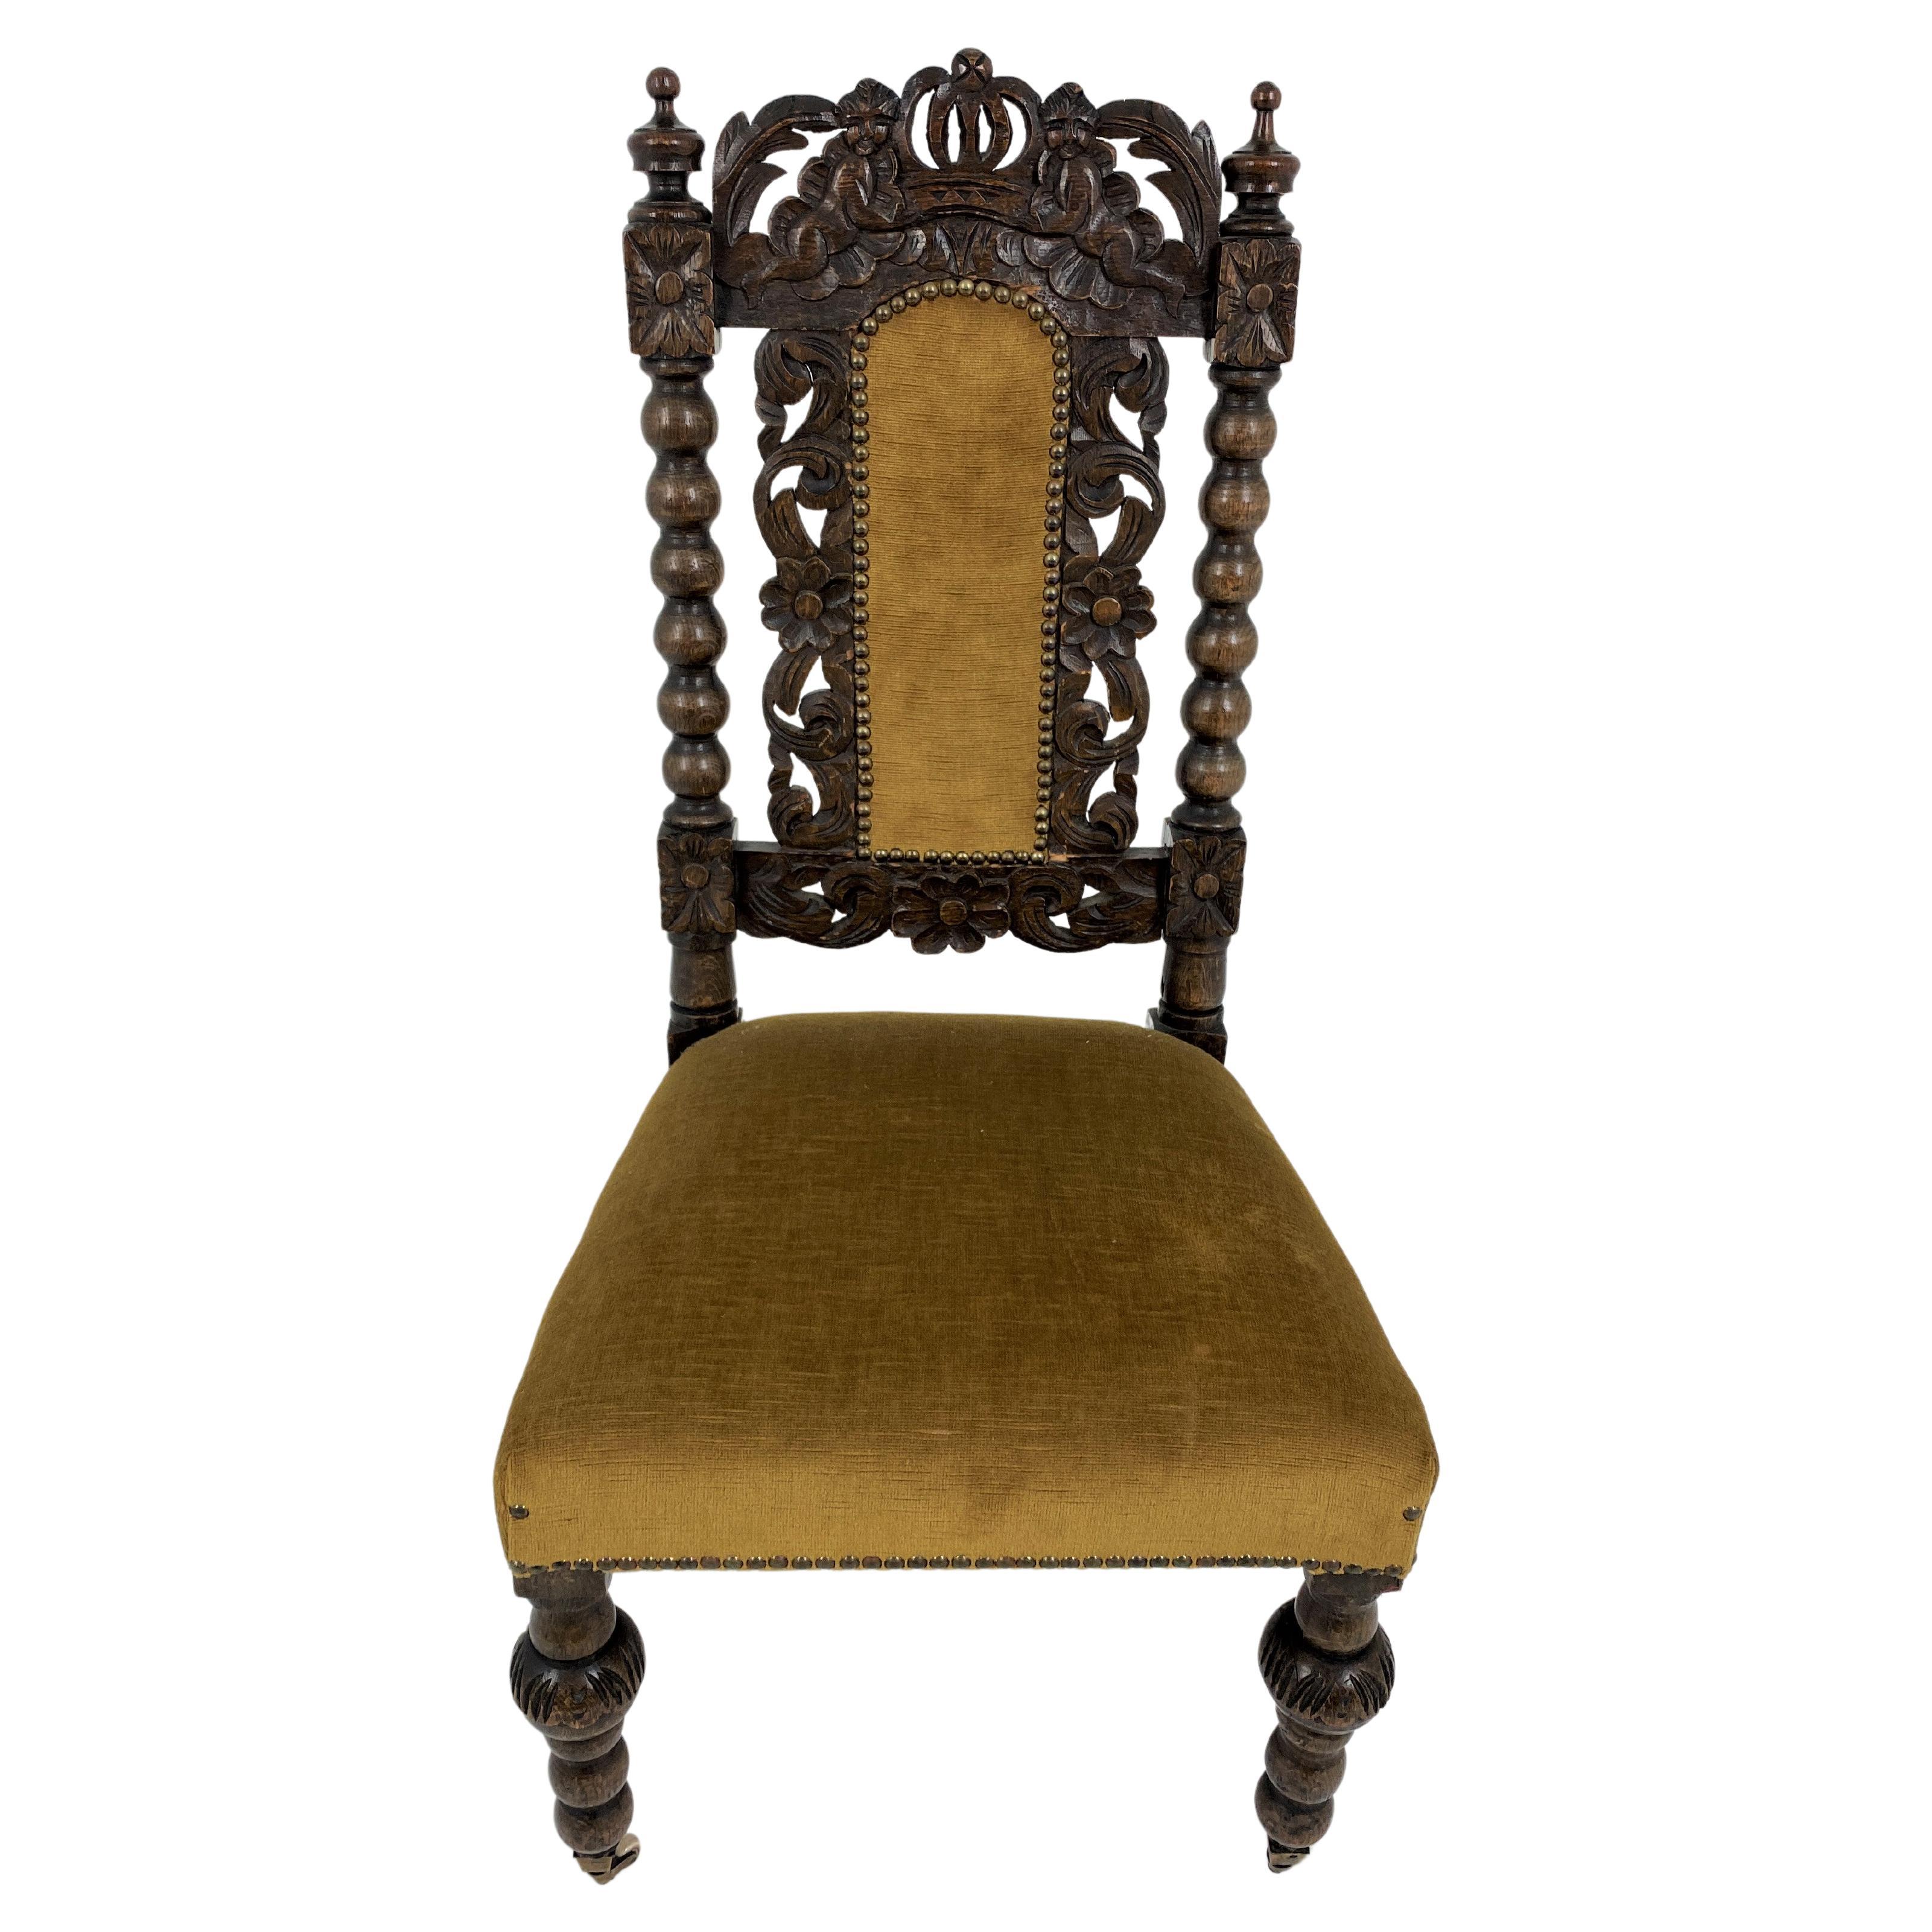 What is a Victorian slipper chair?